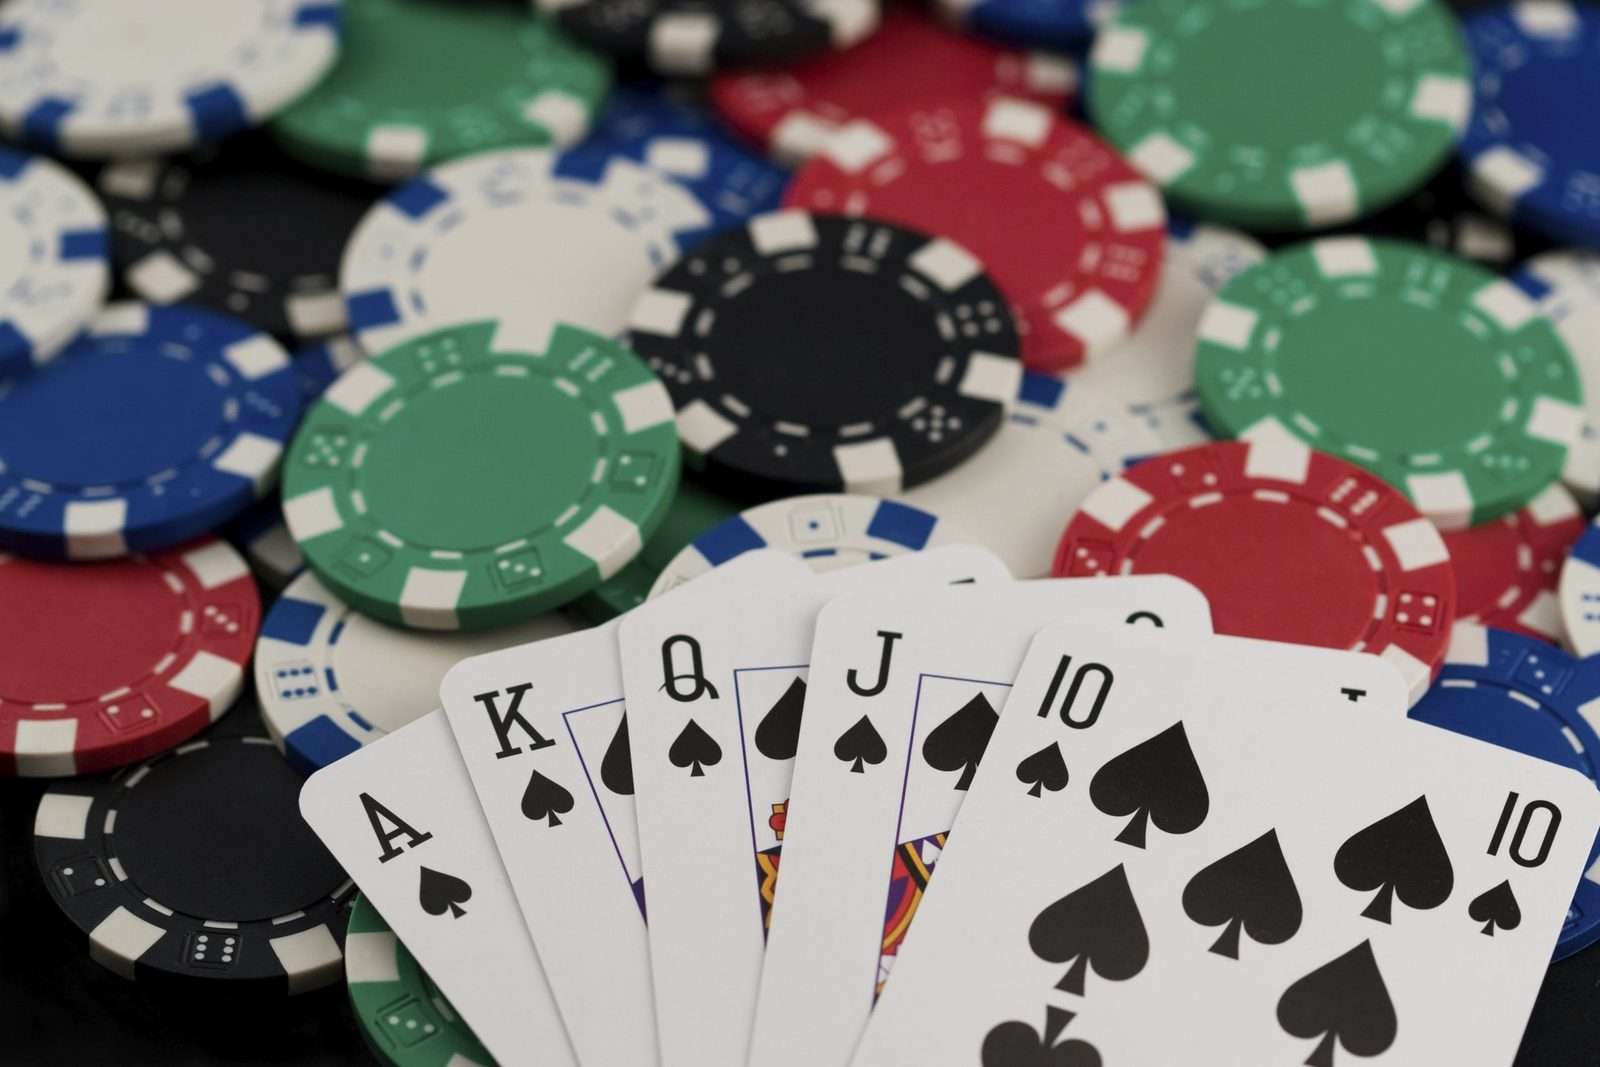 How Does Betting Work In Poker